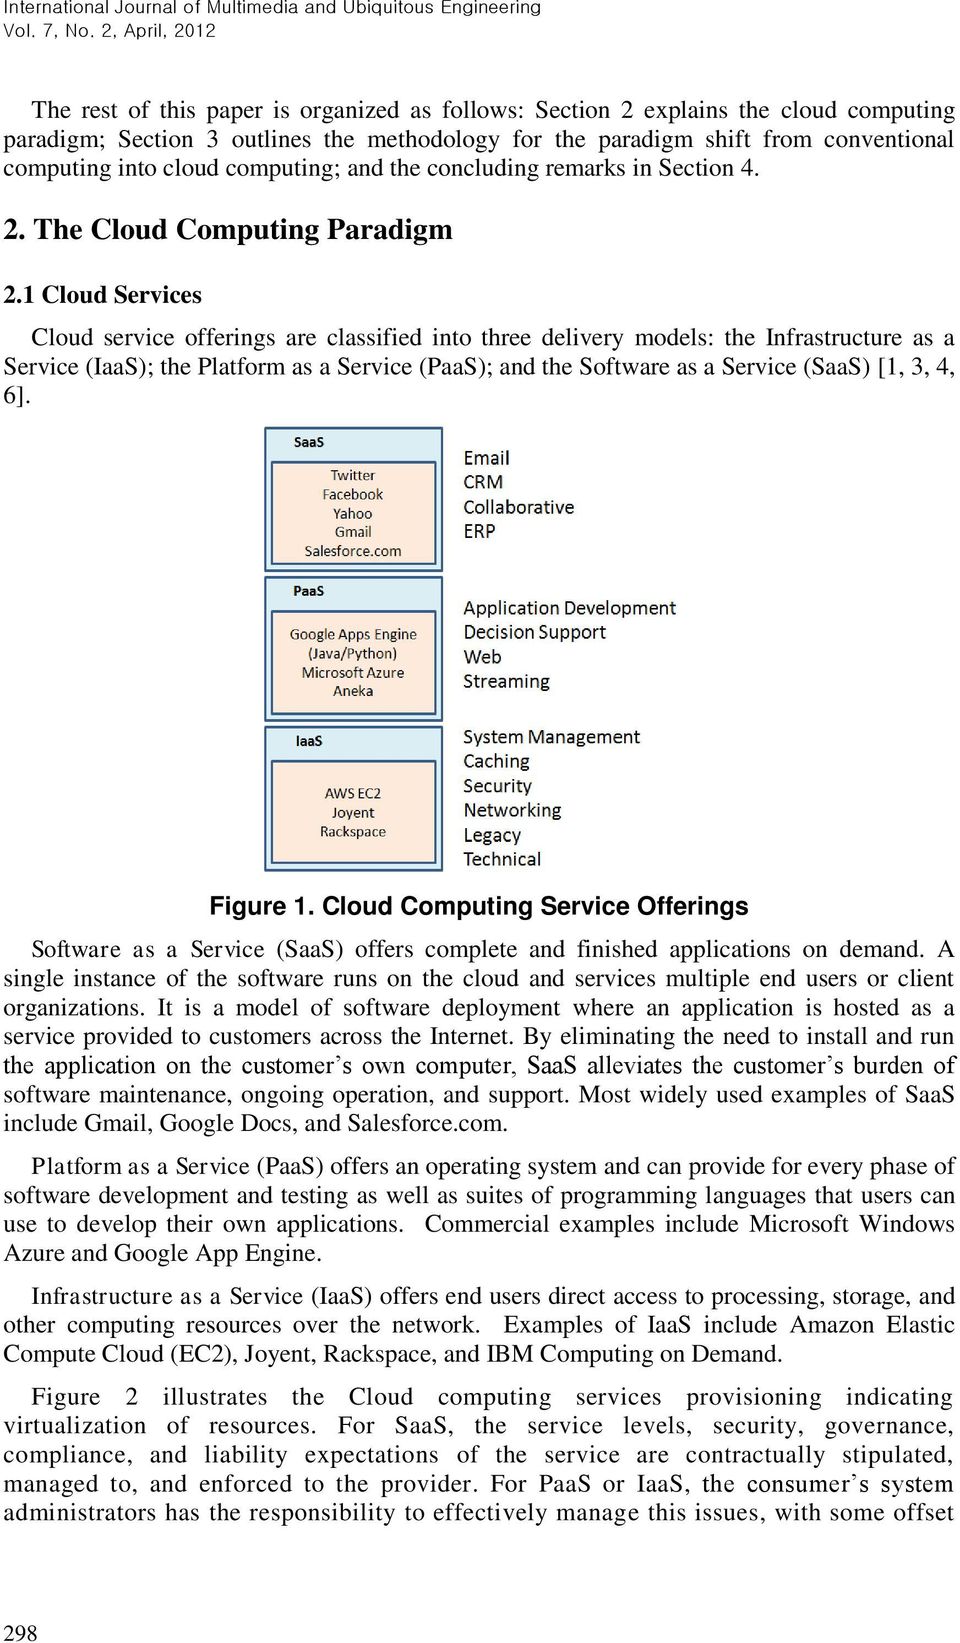 1 Cloud Services Cloud service offerings are classified into three delivery models: the Infrastructure as a Service (IaaS); the Platform as a Service (PaaS); and the Software as a Service (SaaS) [1,